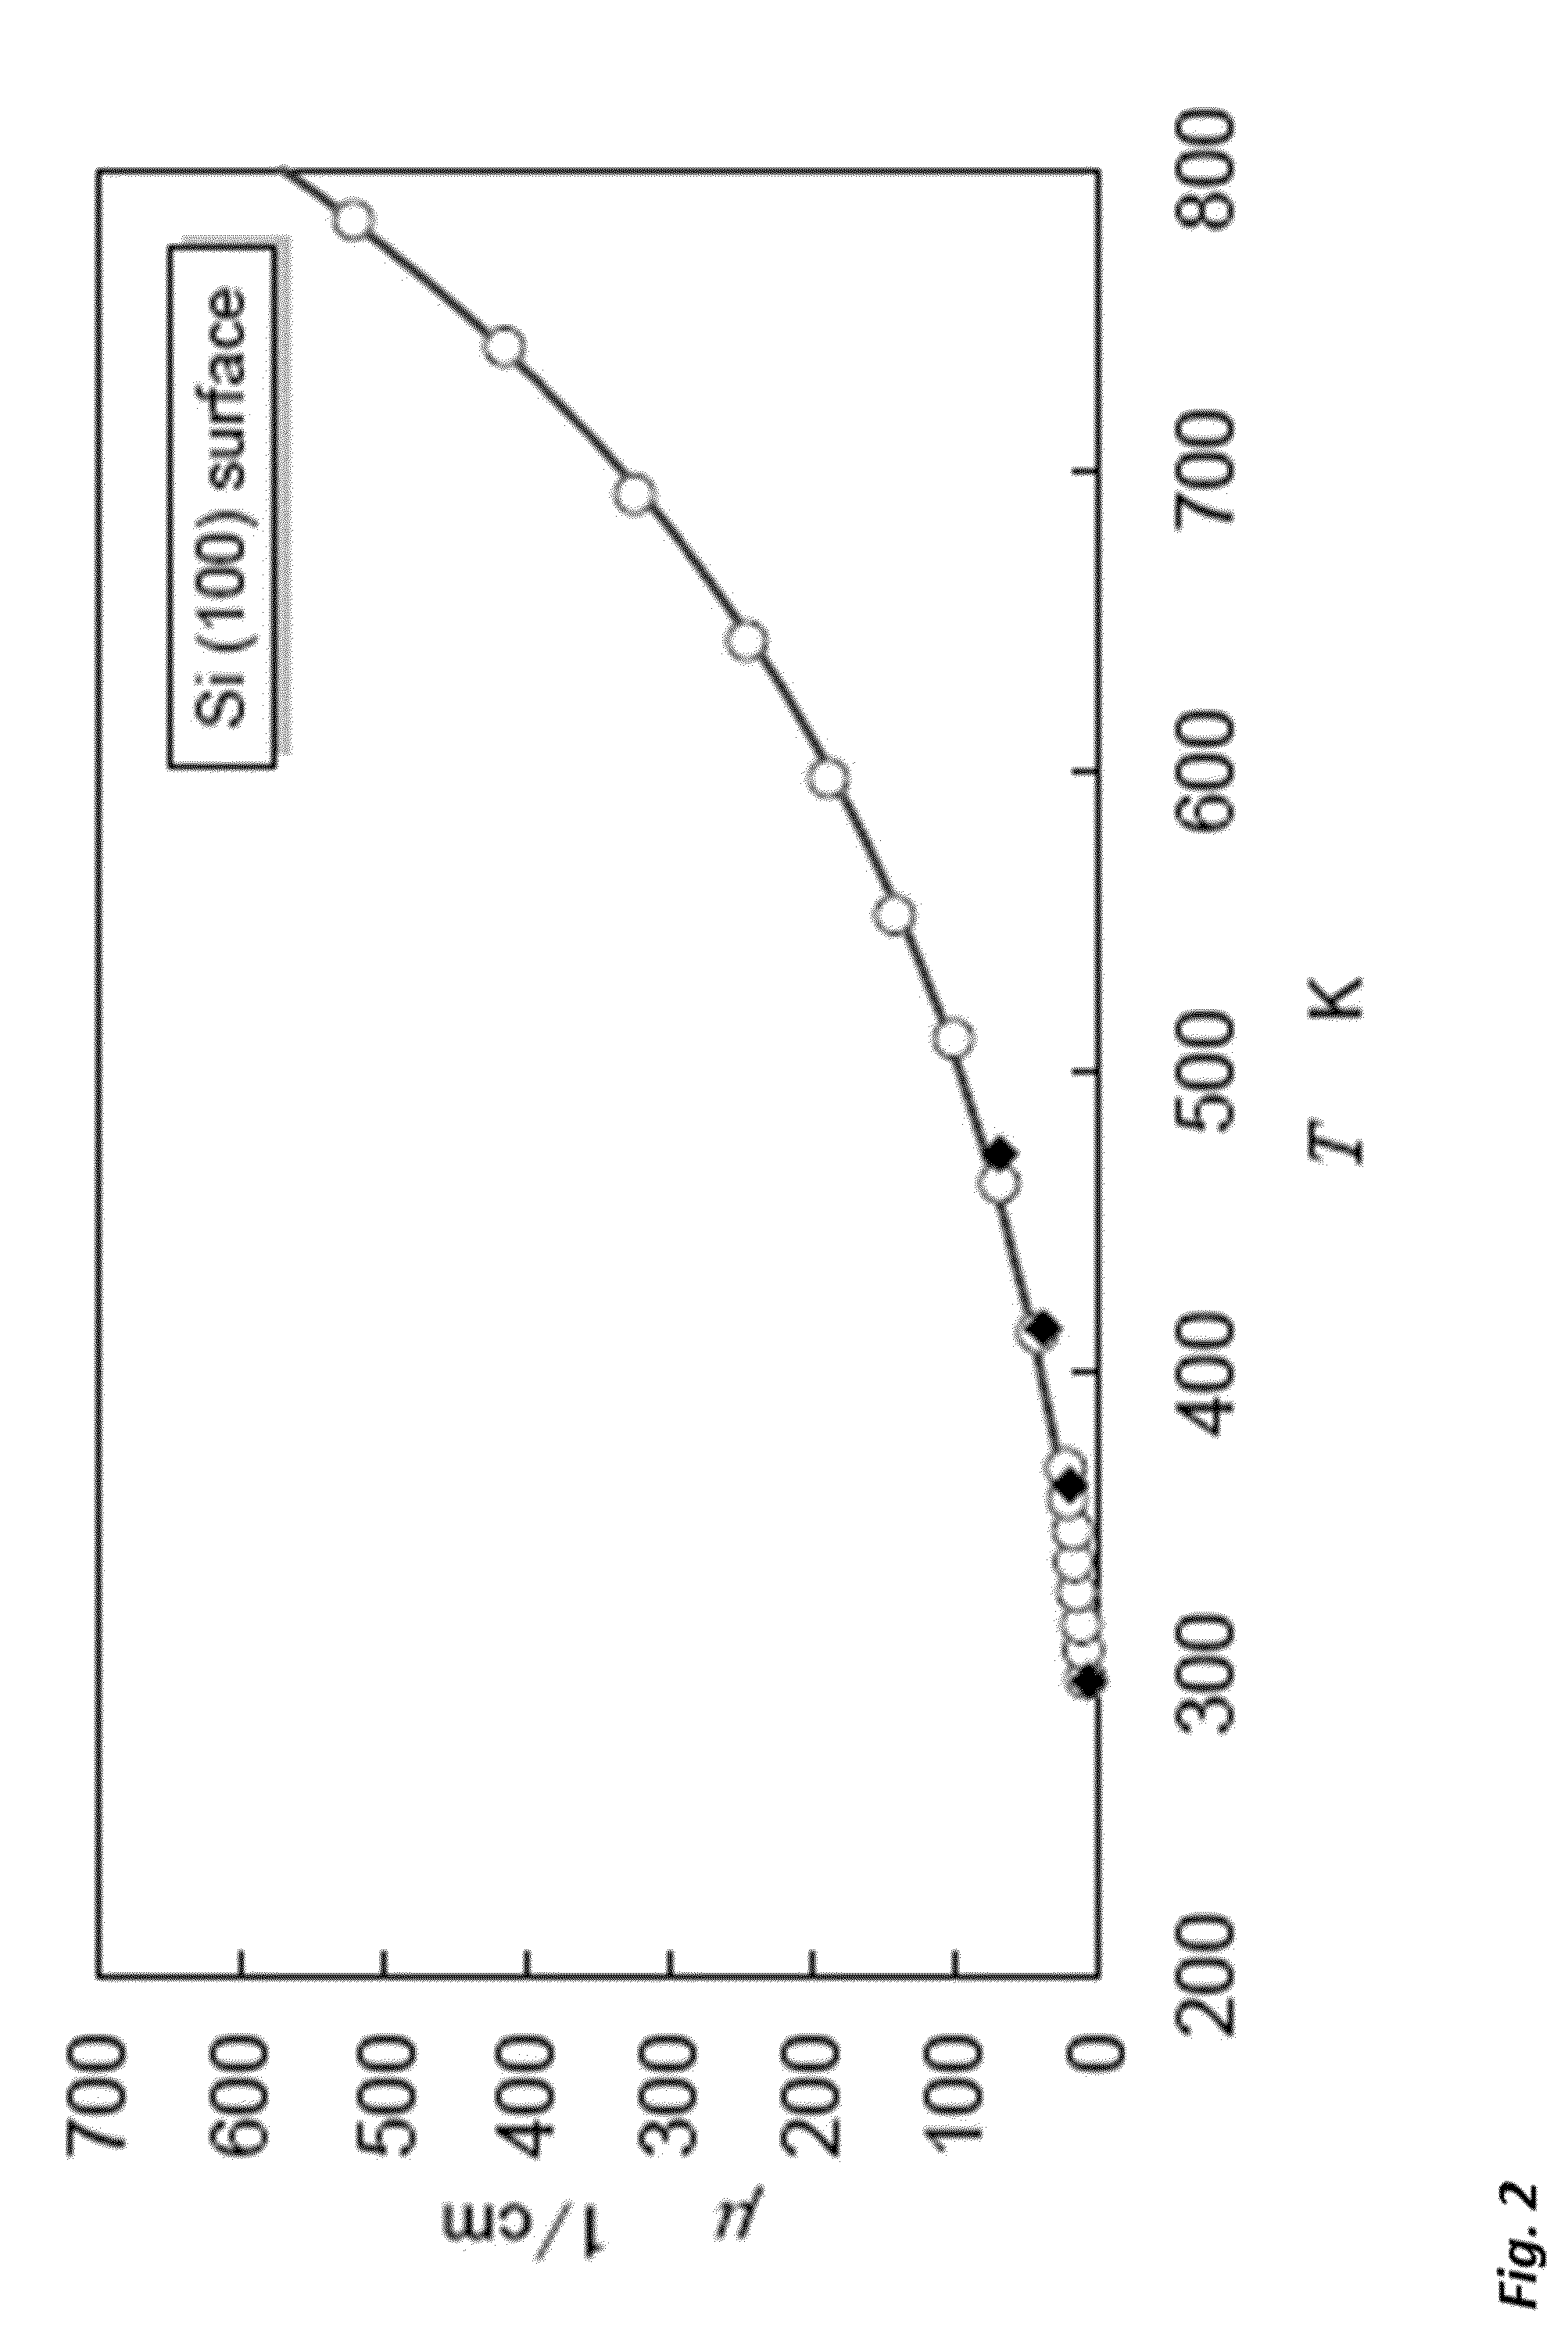 Systems and methods for laser splitting and device layer transfer